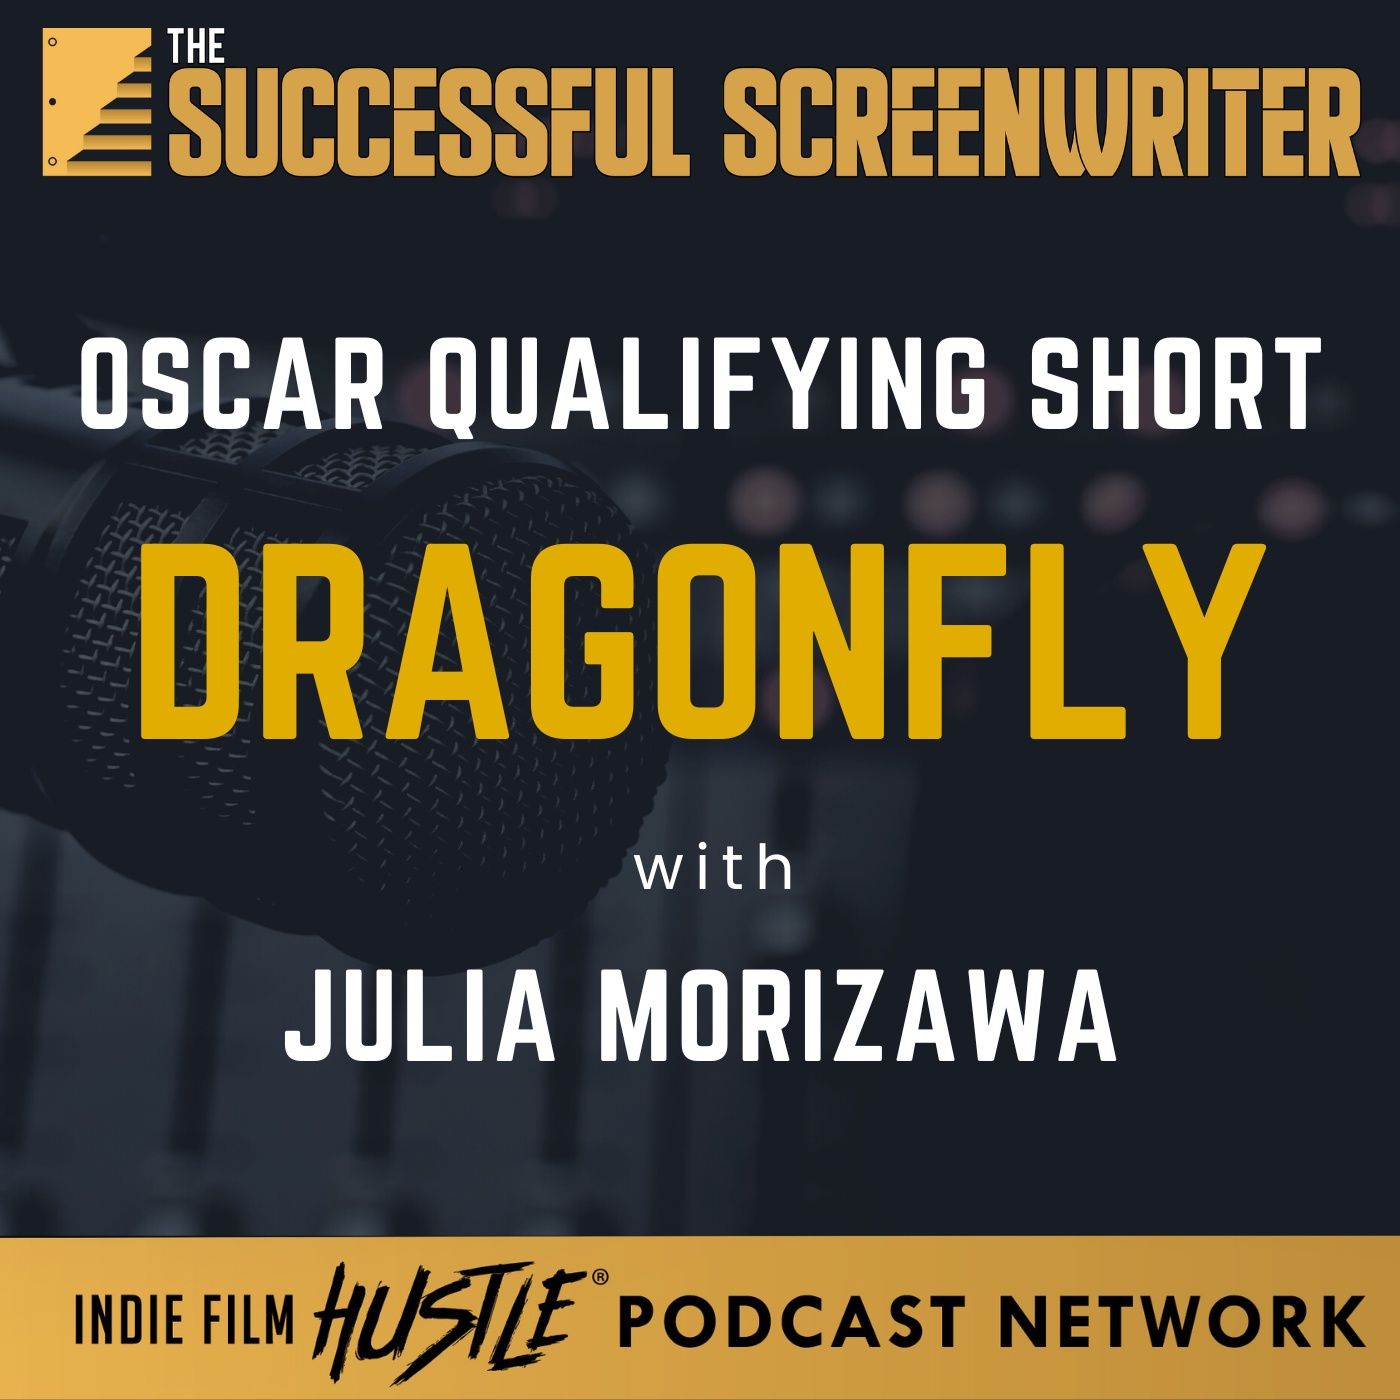 Ep 216 - The Birth of "Dragonfly": An Oscar-Qualifying Journey with Julia Morizawa